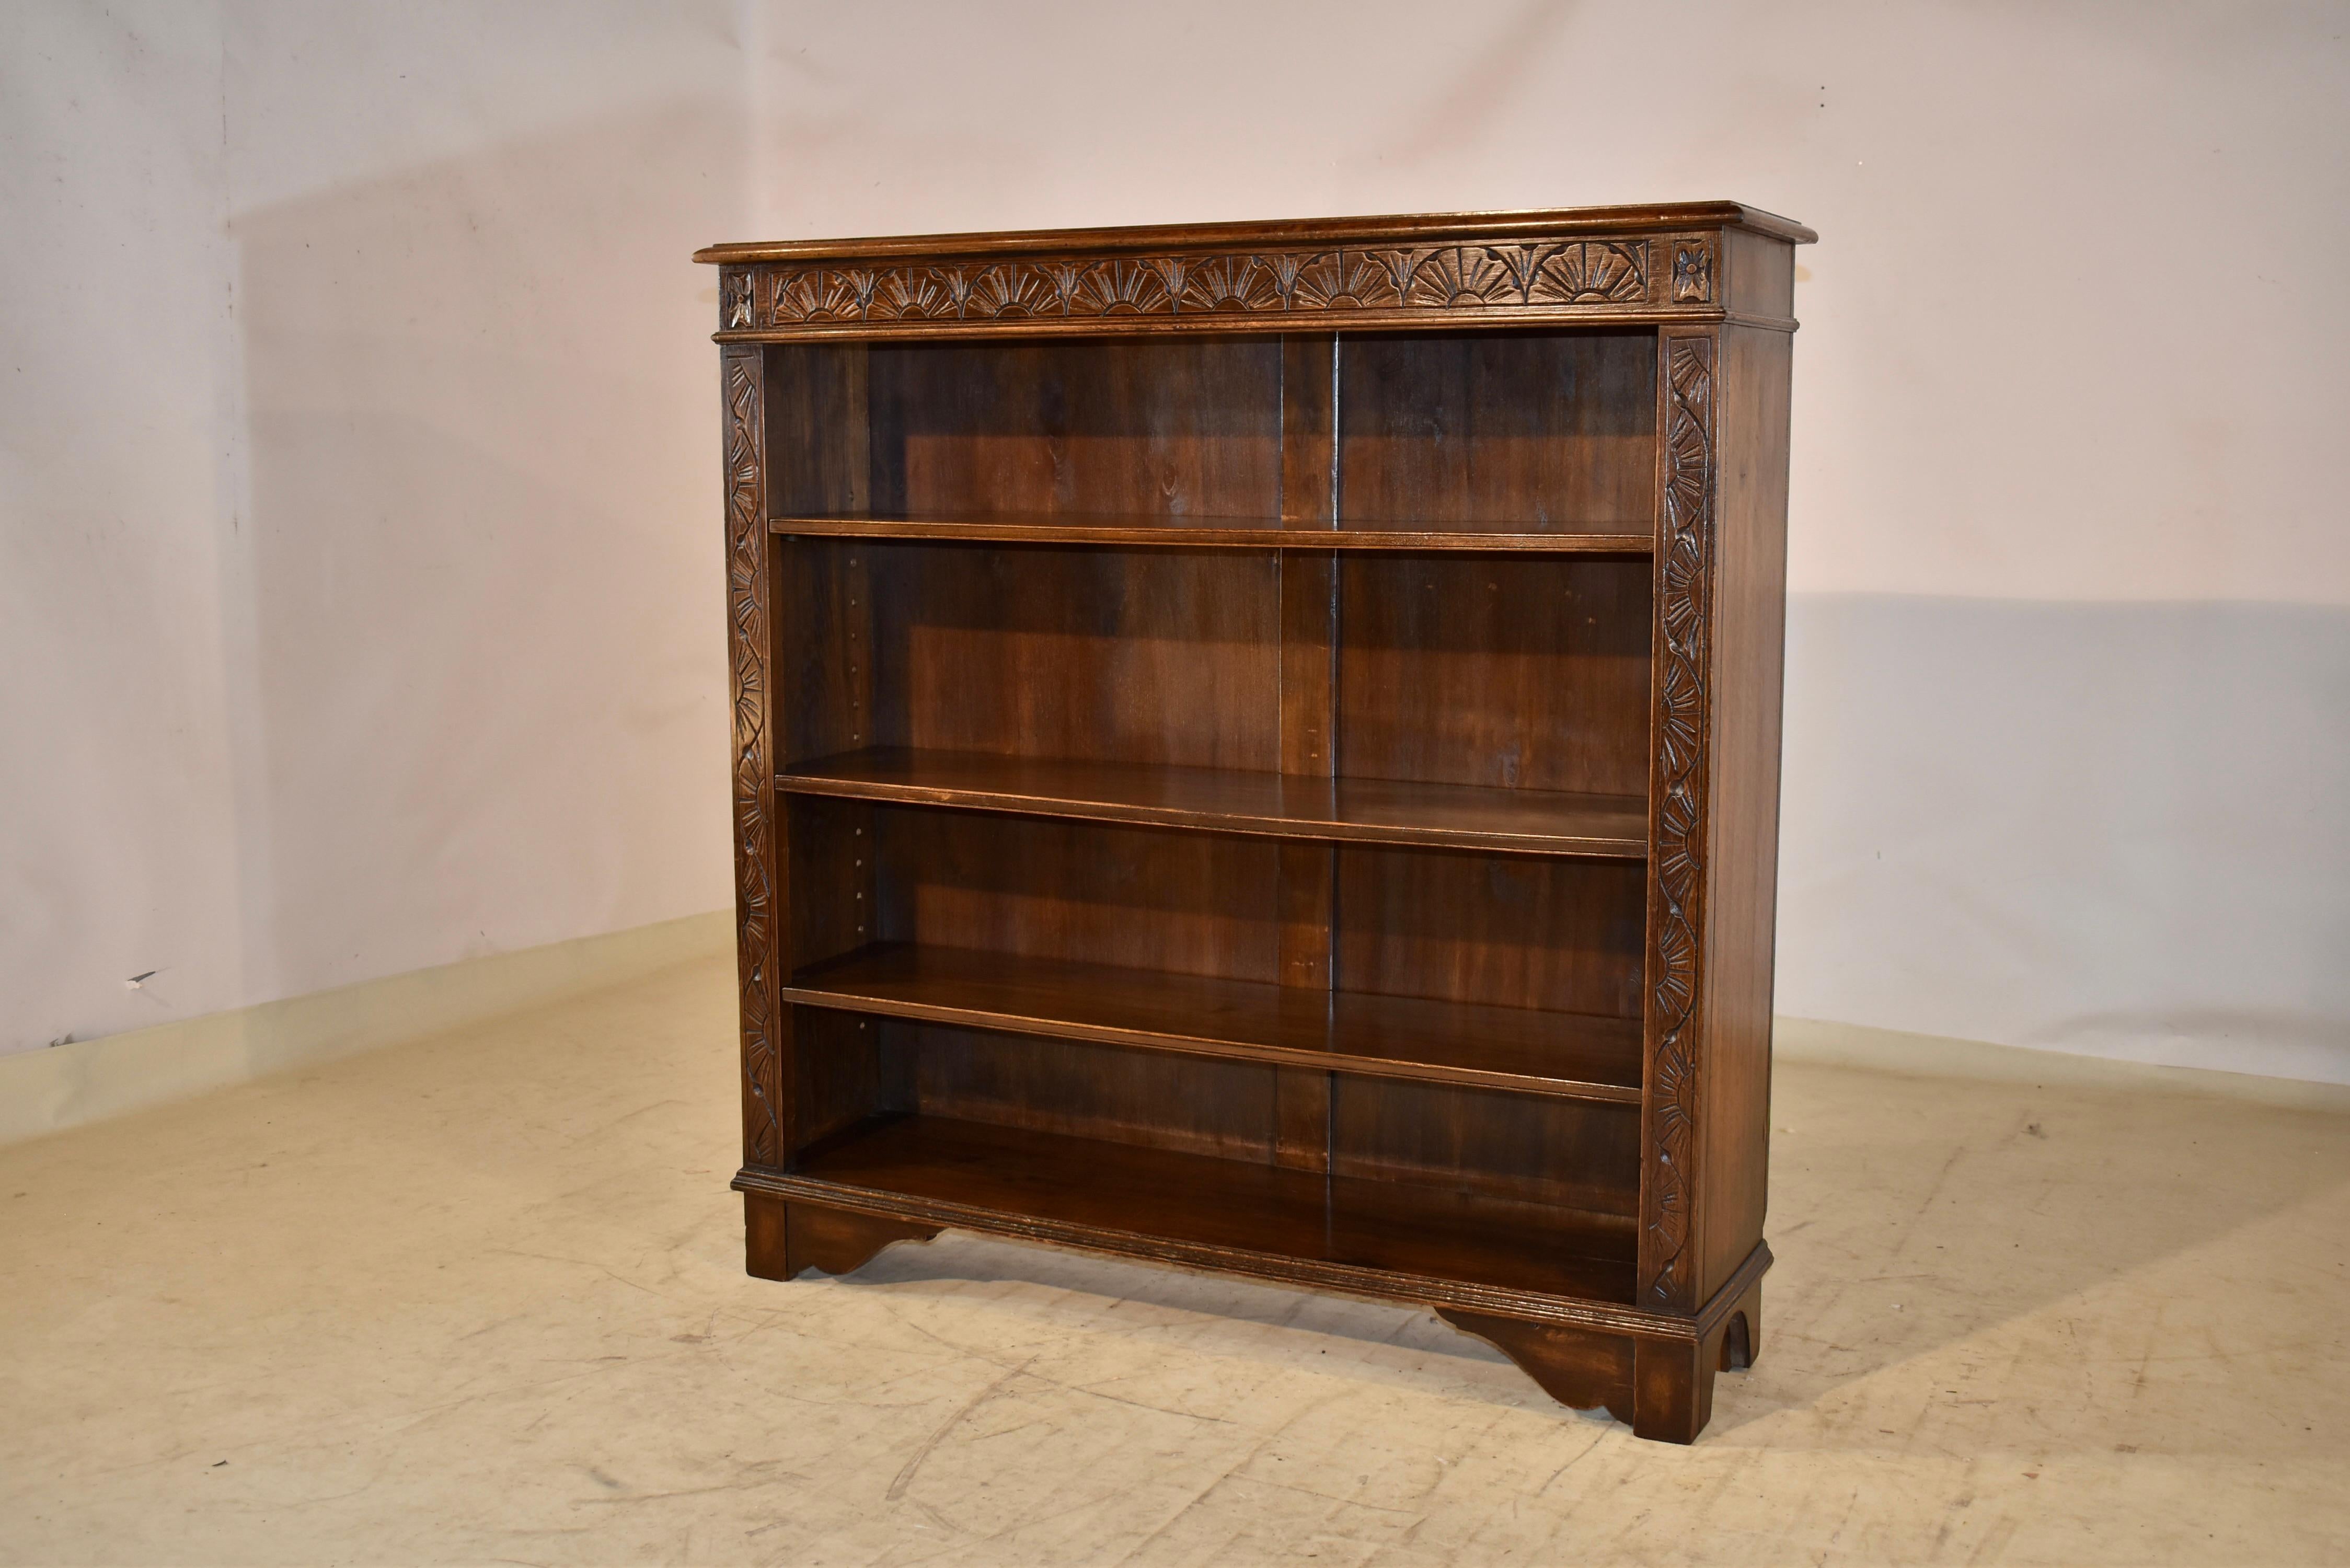 Late 19th Century English Oak Bookcase In Good Condition For Sale In High Point, NC